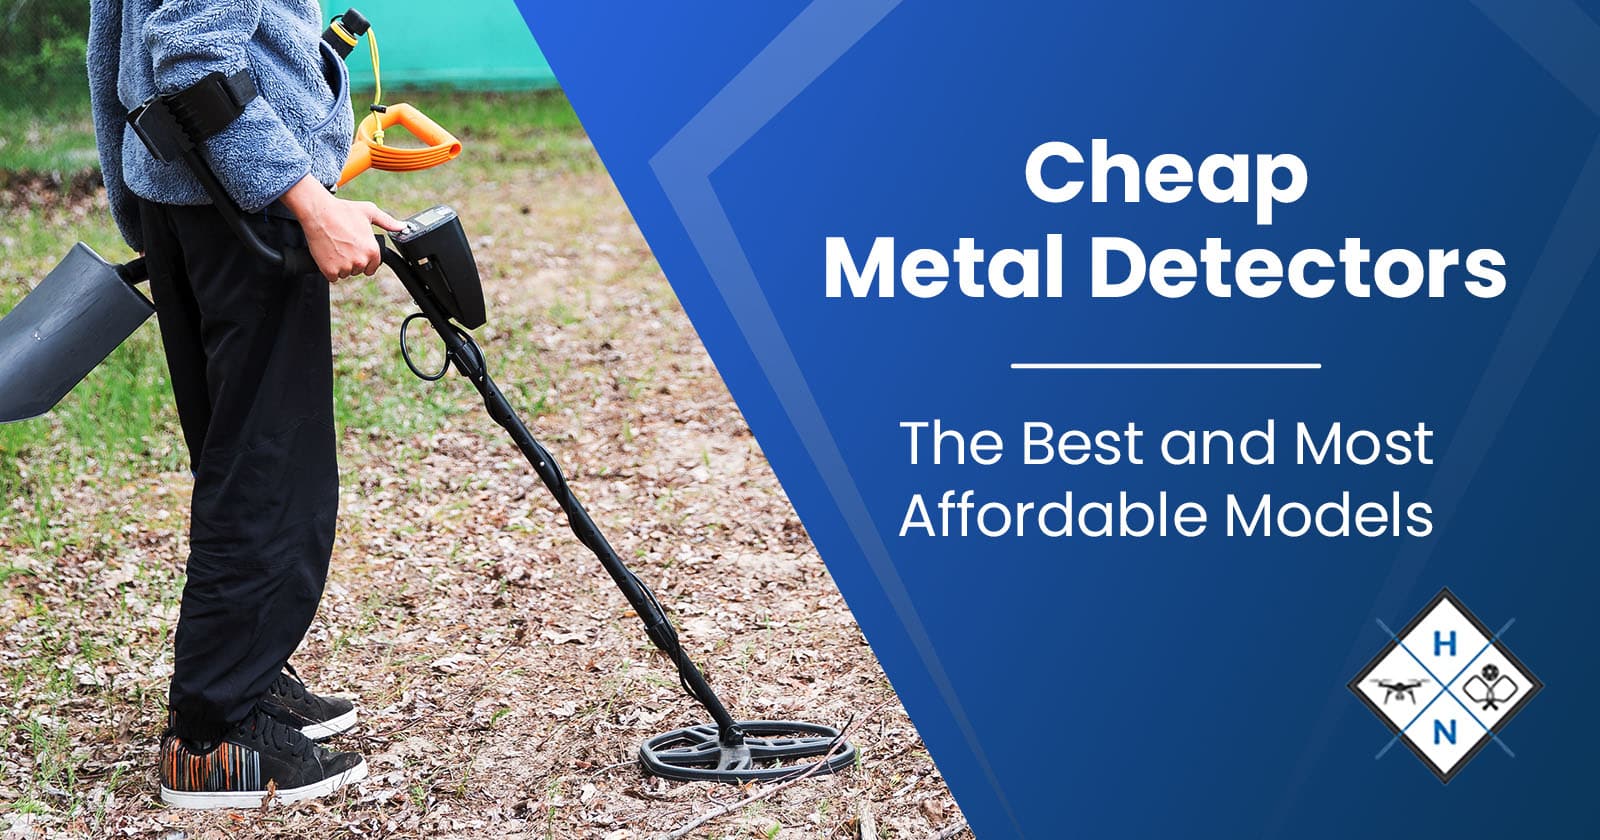 Cheap Metal Detectors – The Best and Most Affordable Models